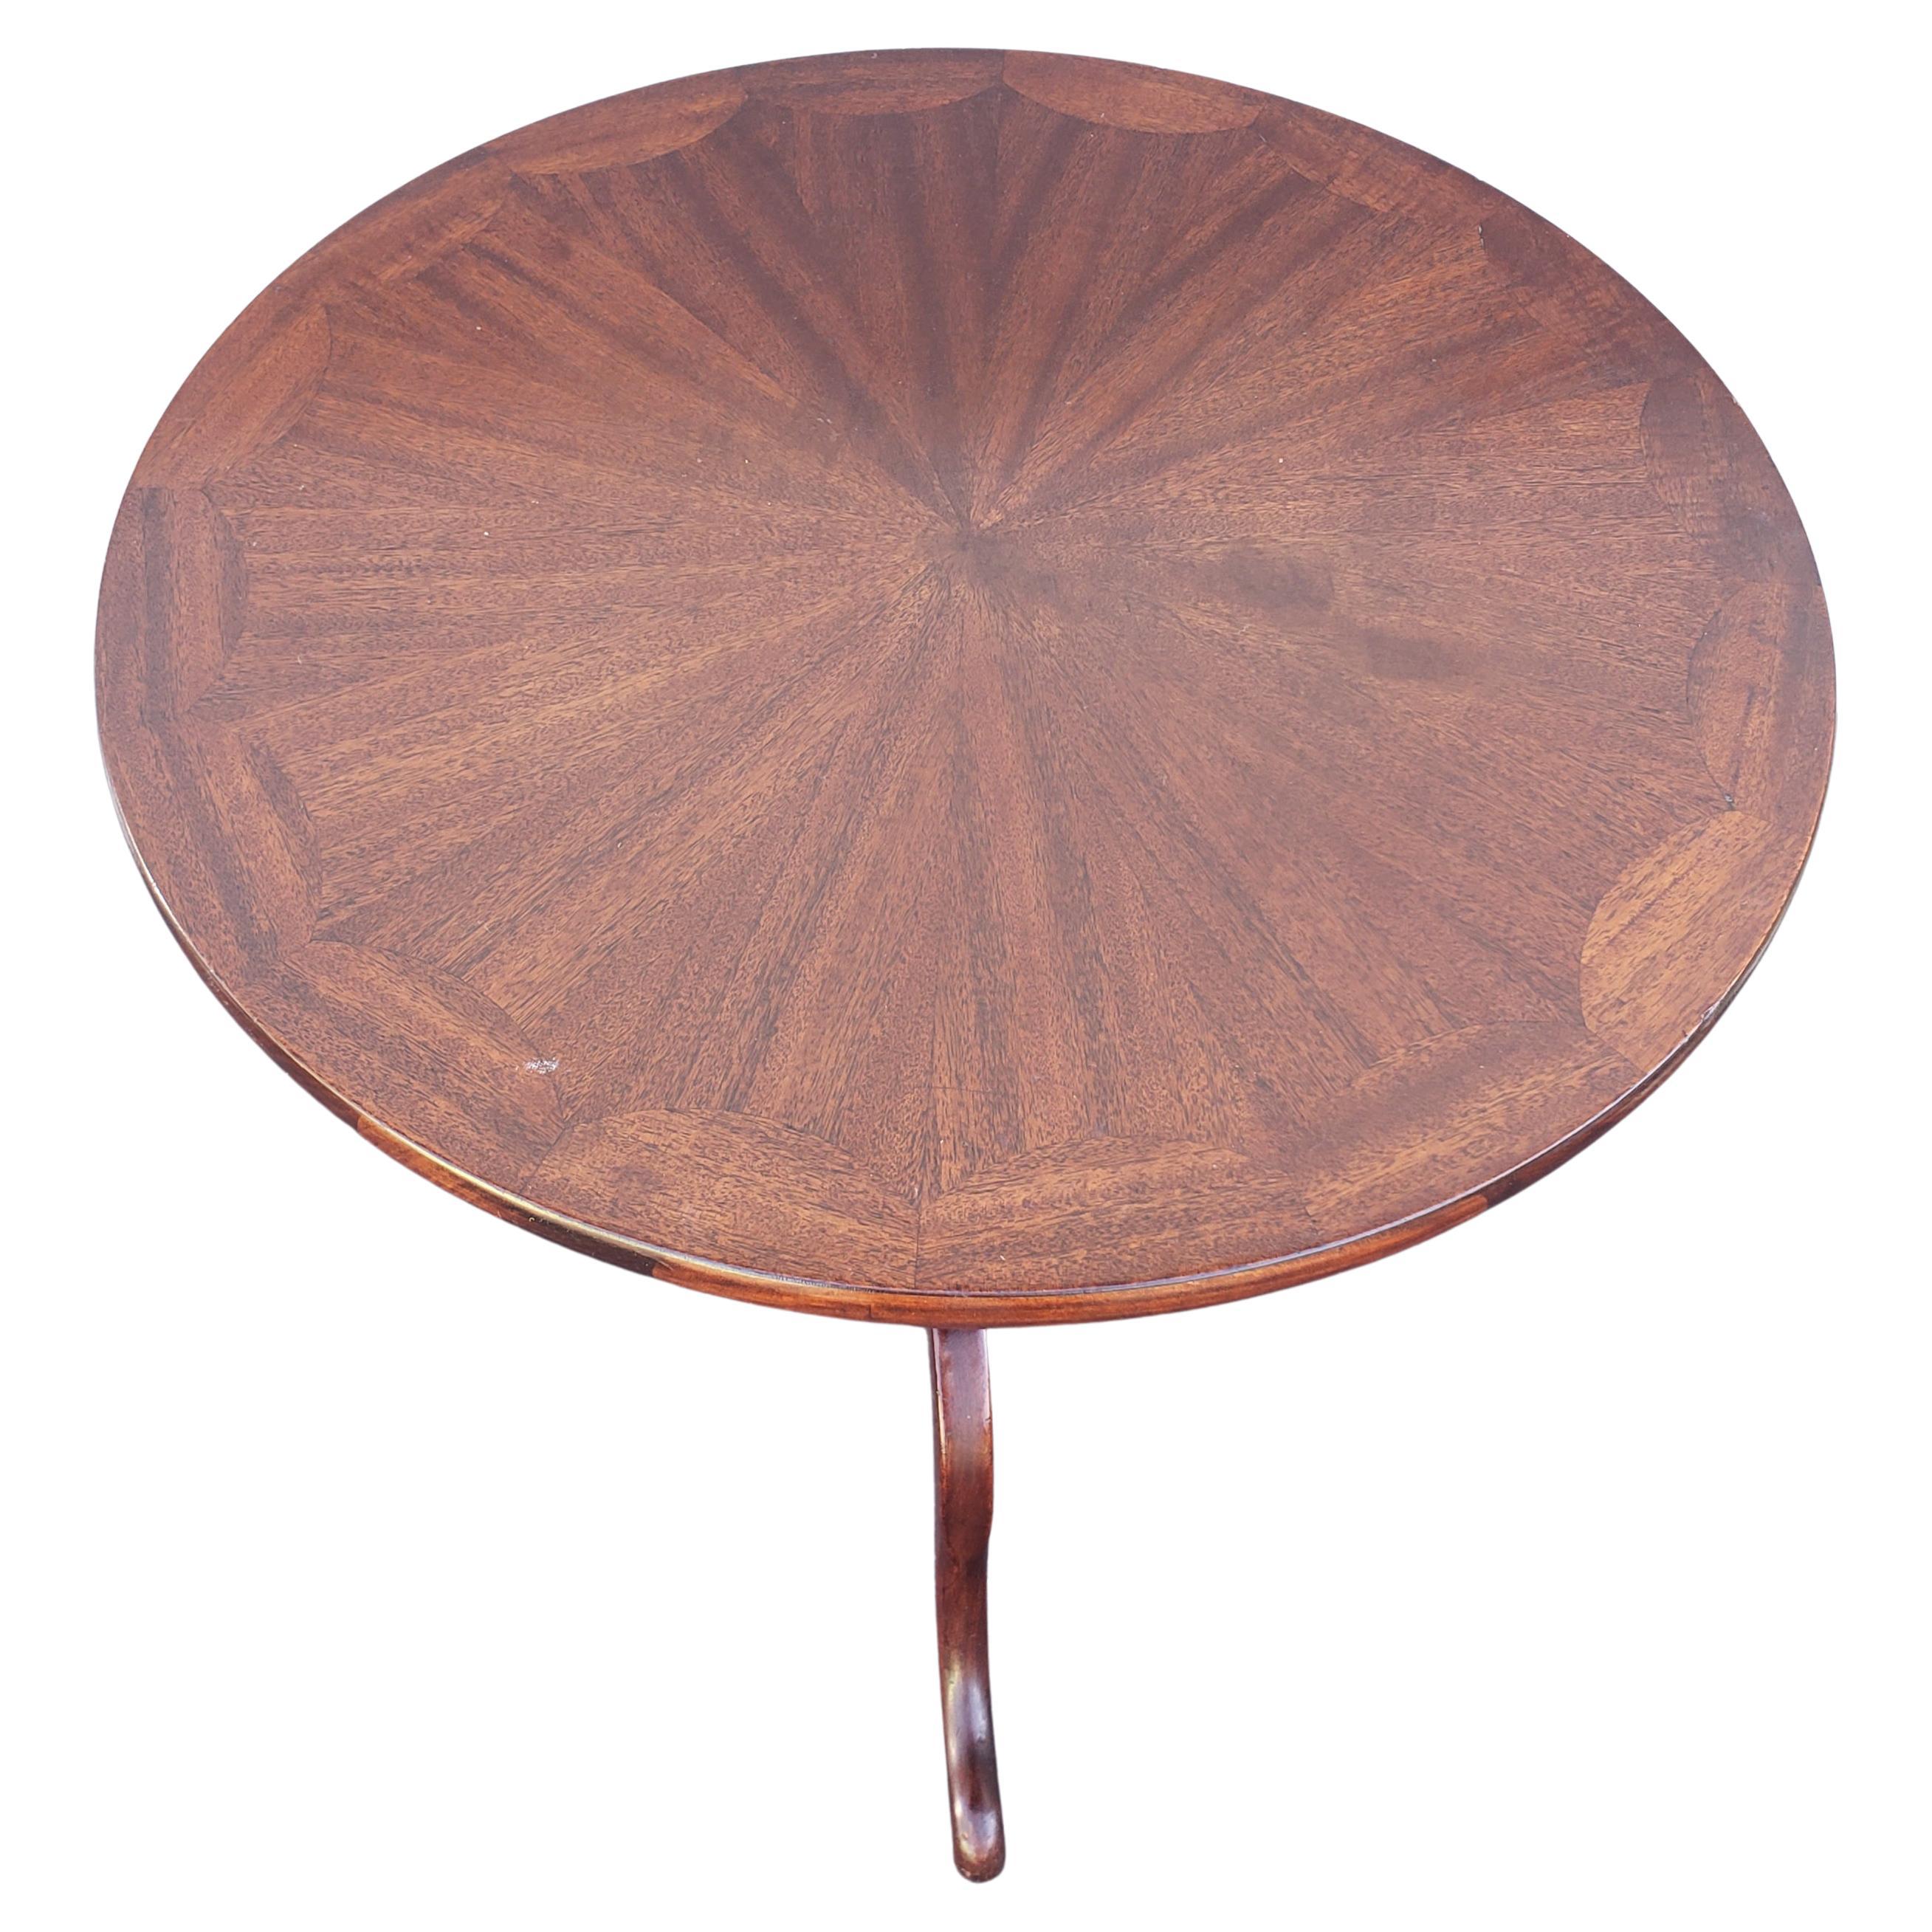 English Mahogany One Board Parquetry Tilt-Top Tea Table Desert Table, C. 1860s In Good Condition For Sale In Germantown, MD